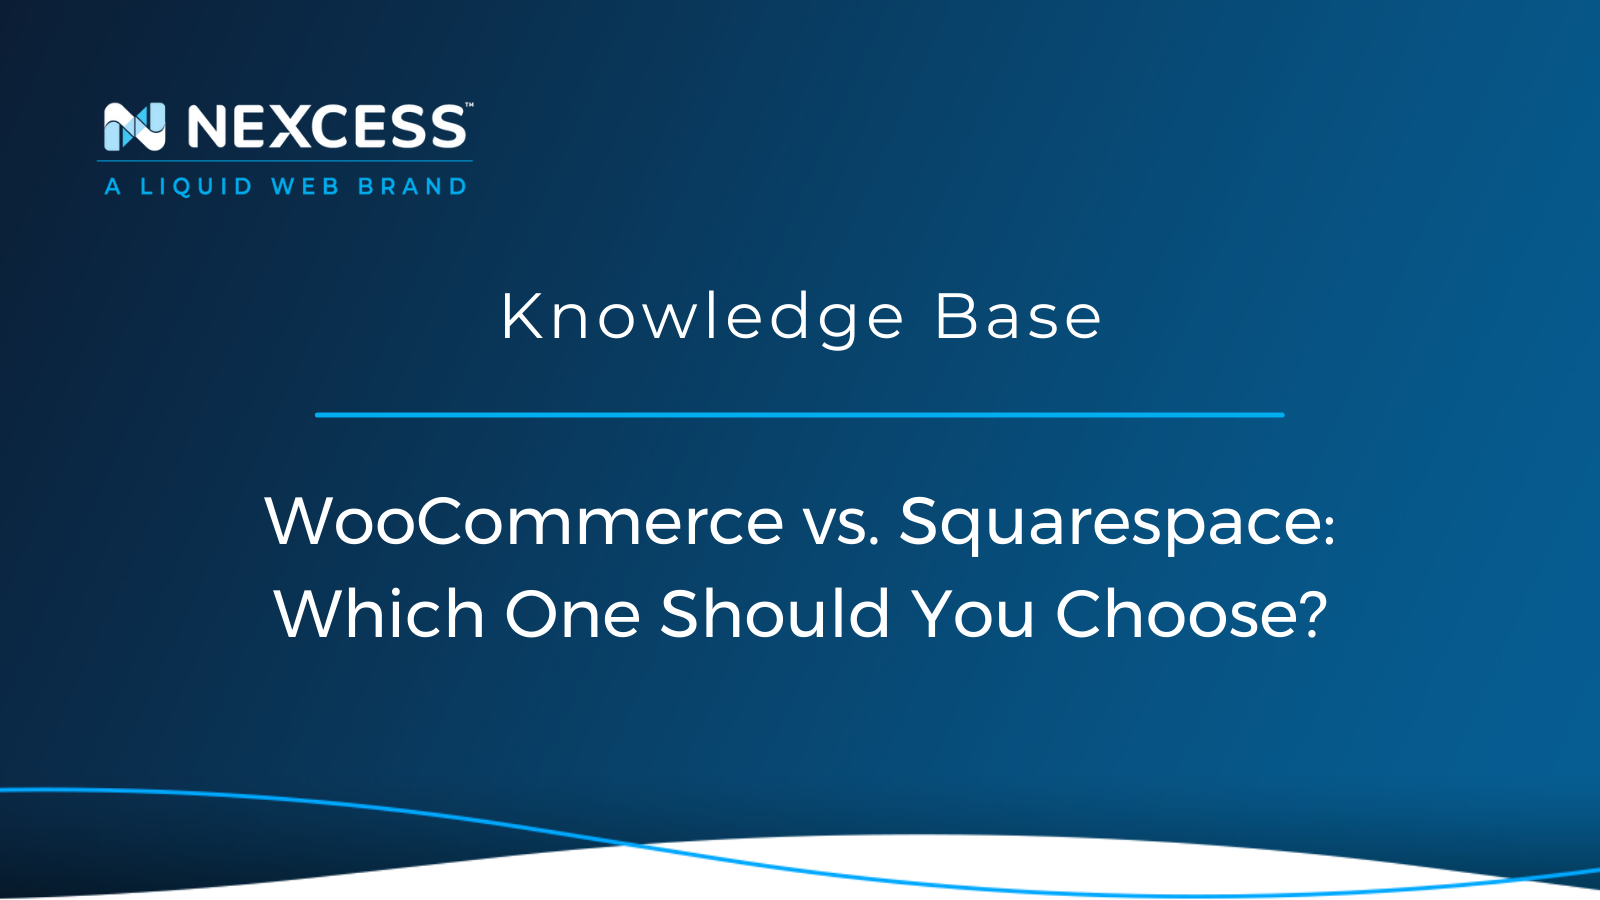 WooCommerce vs. Squarespace: Which One Should You Choose?